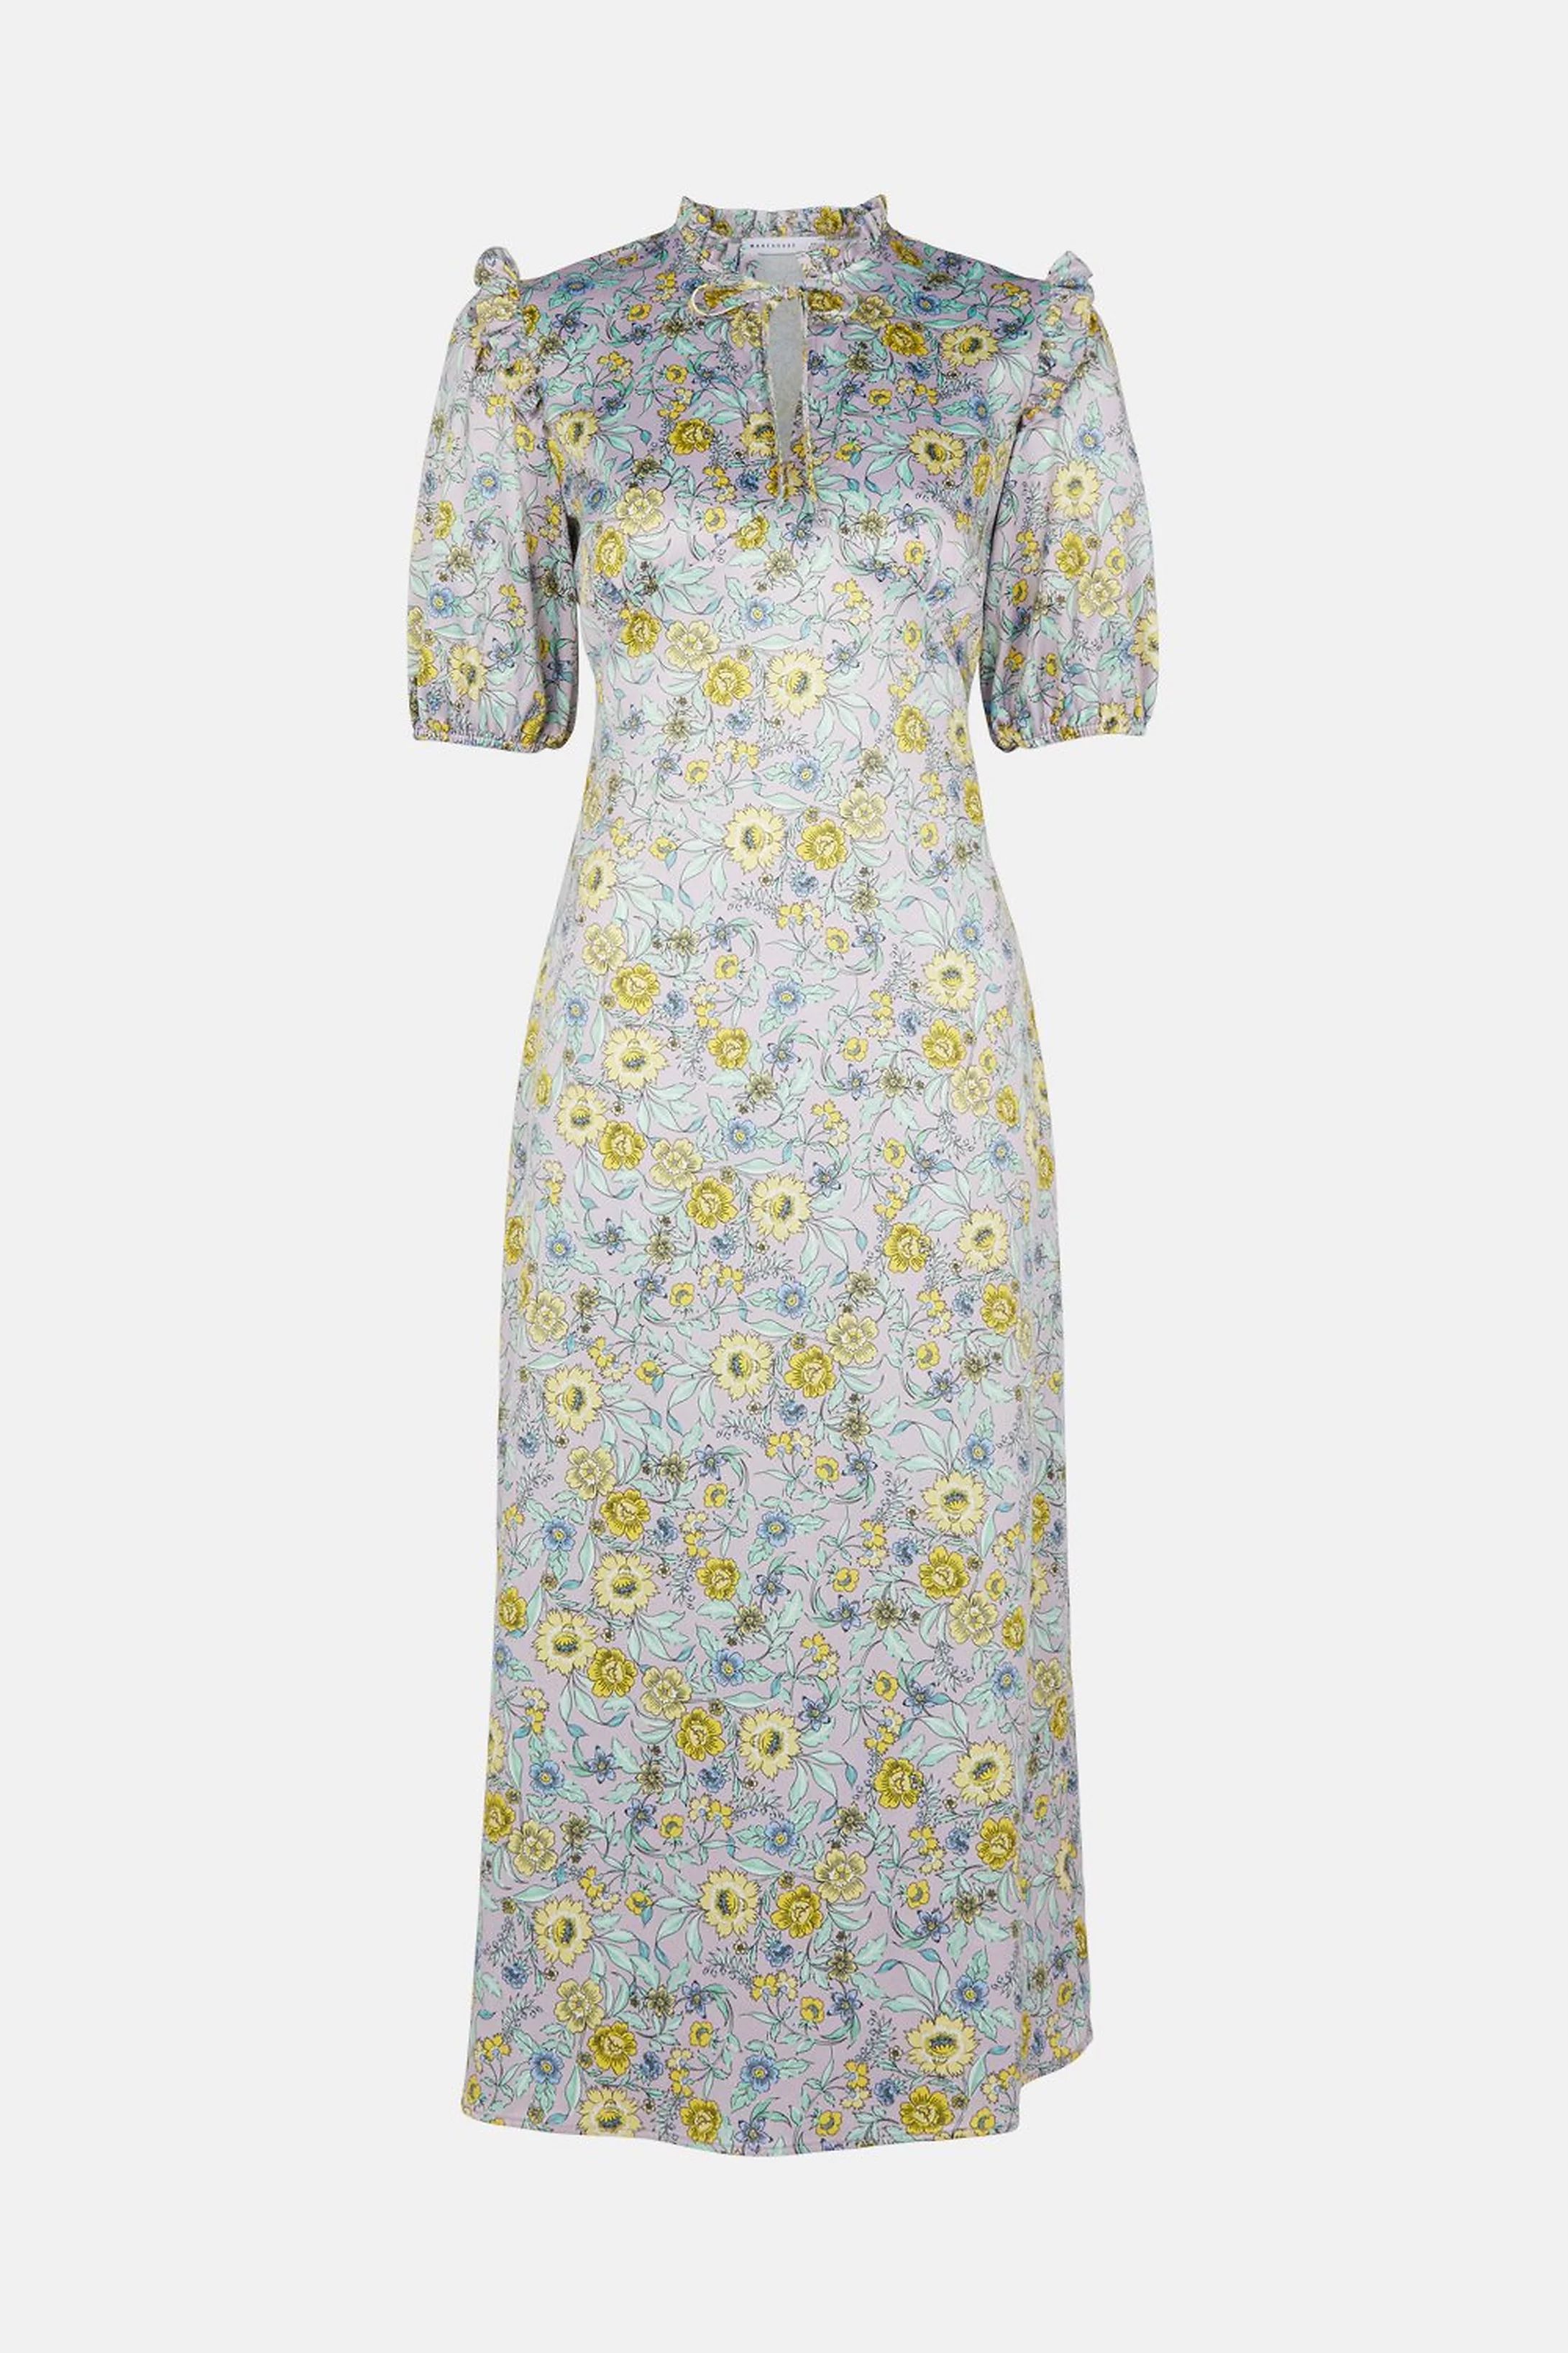 Midi Dress In Floral With Frill Hem | Warehouse UK & IE